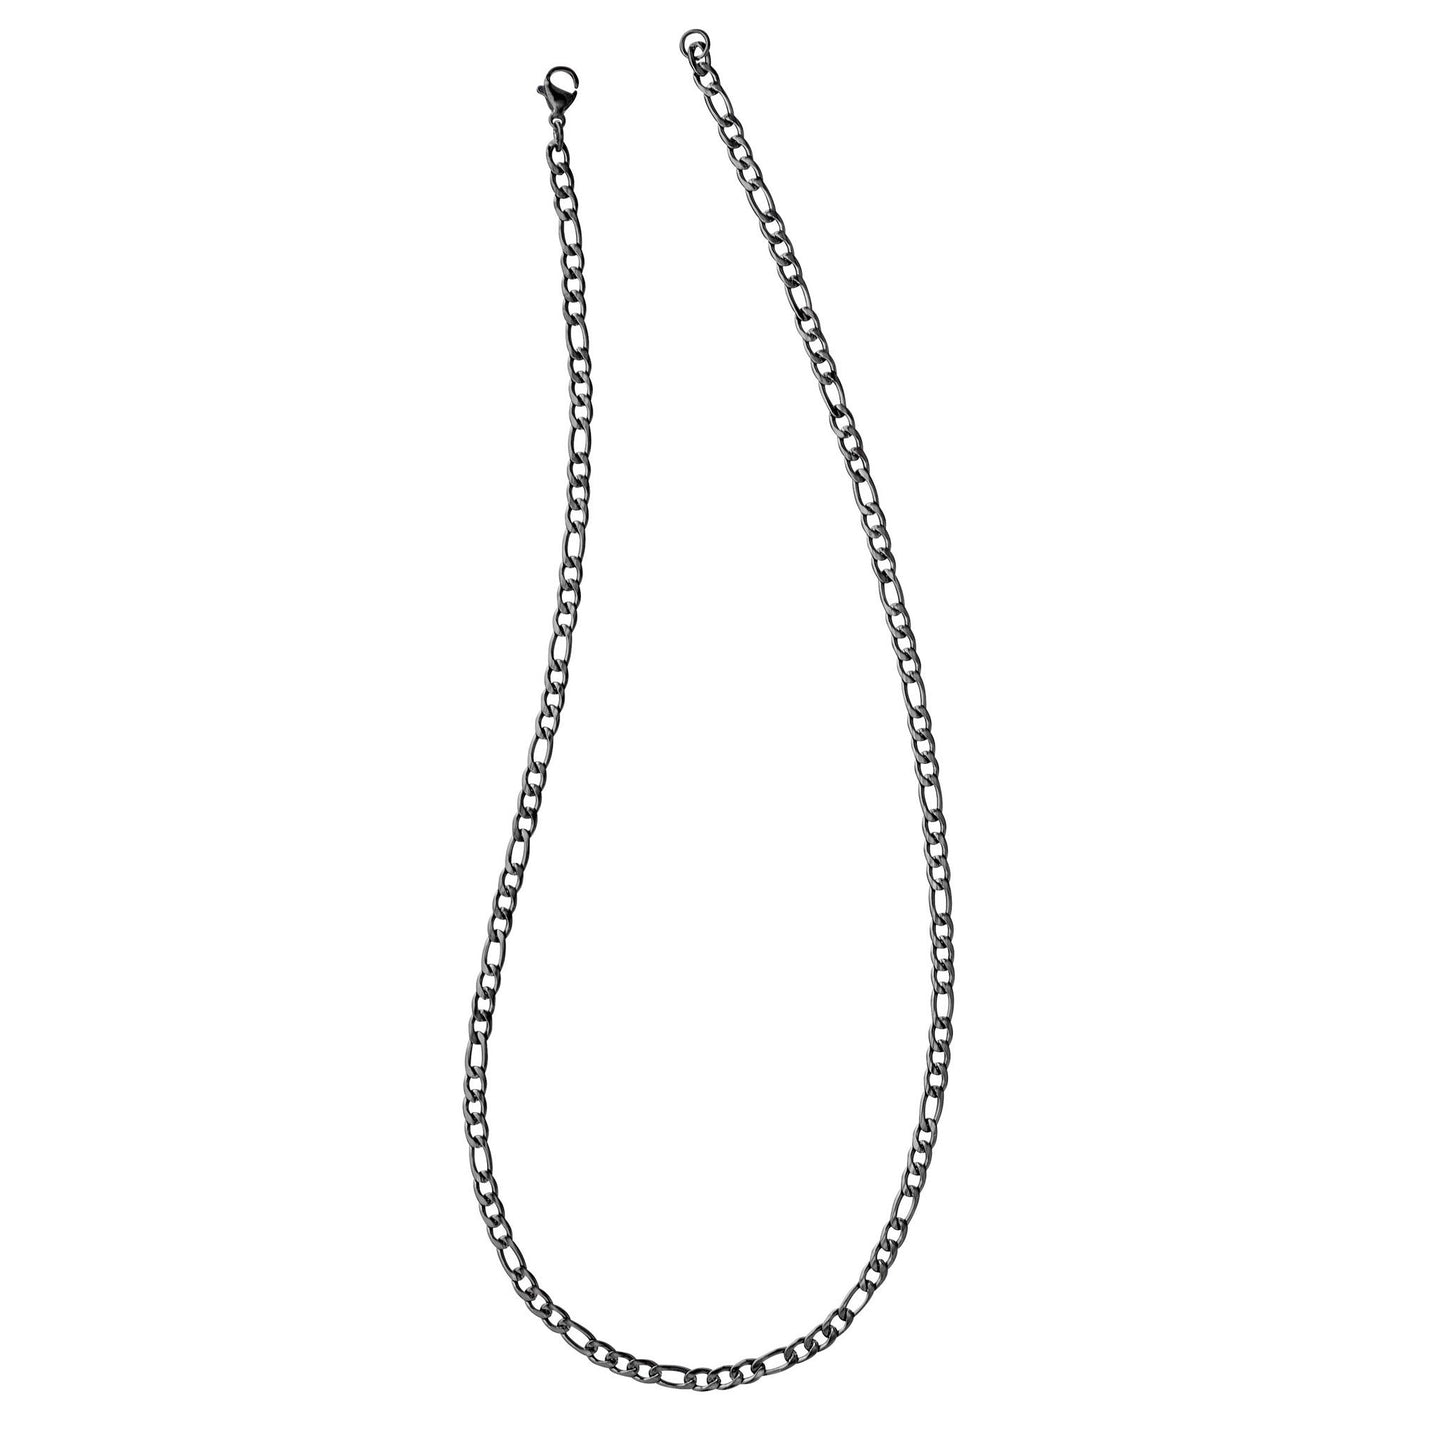 A 18" stainless steel gold plated figaro chain displayed on a neutral white background.